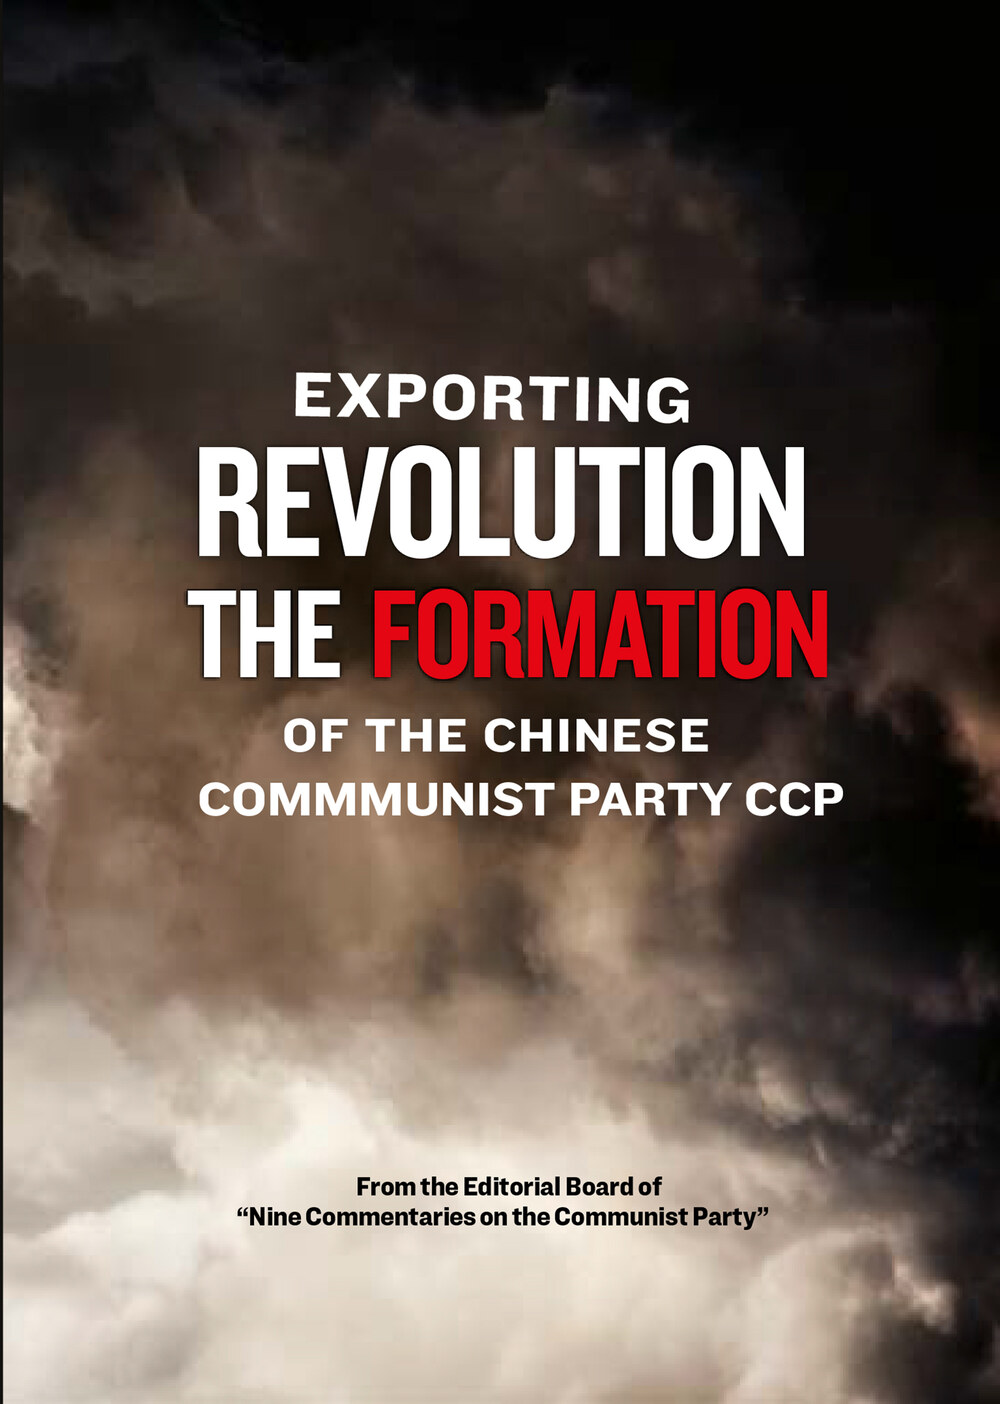 K5086 - Exporting Revolution - The Formation of the Chinese Communsit Party CCP